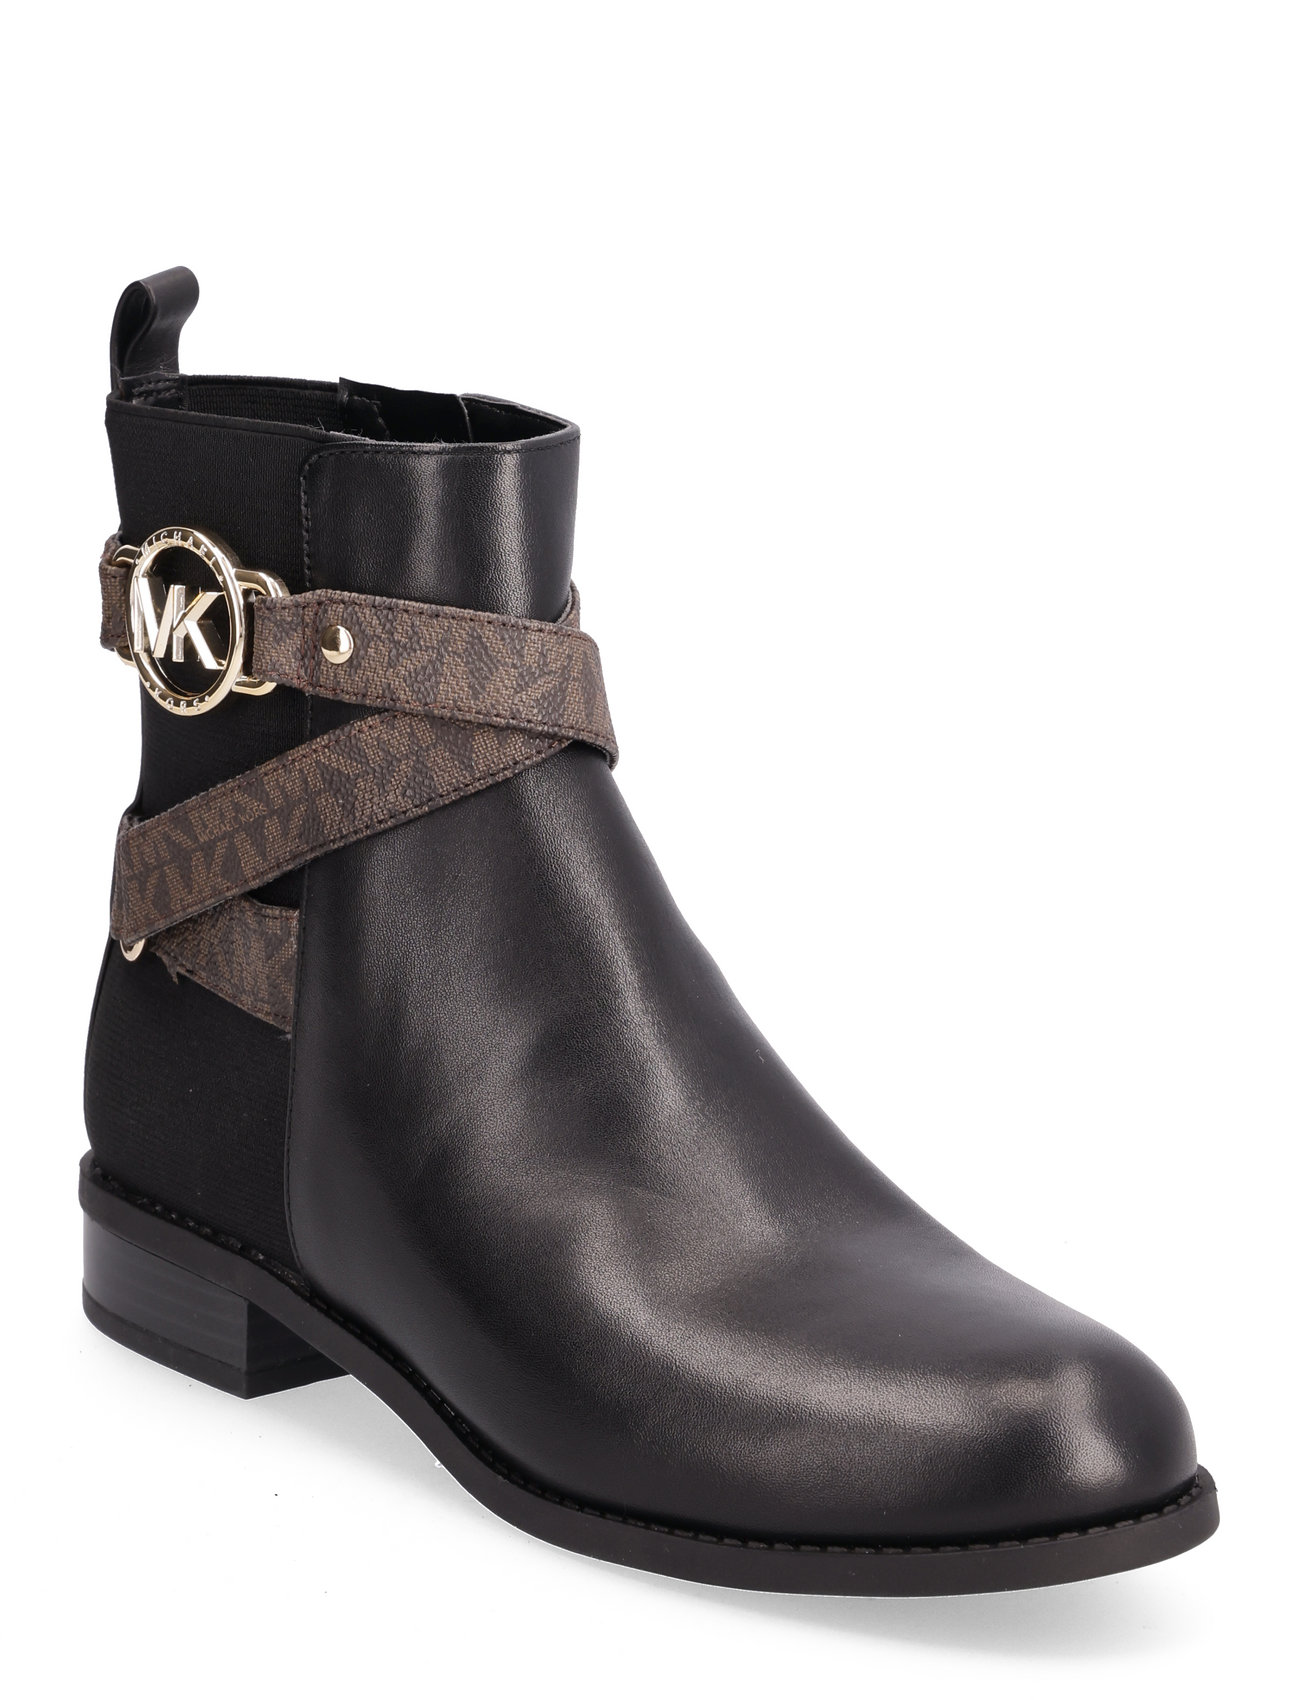 Michael Kors Rory Flat Bootie - Flat ankle boots 